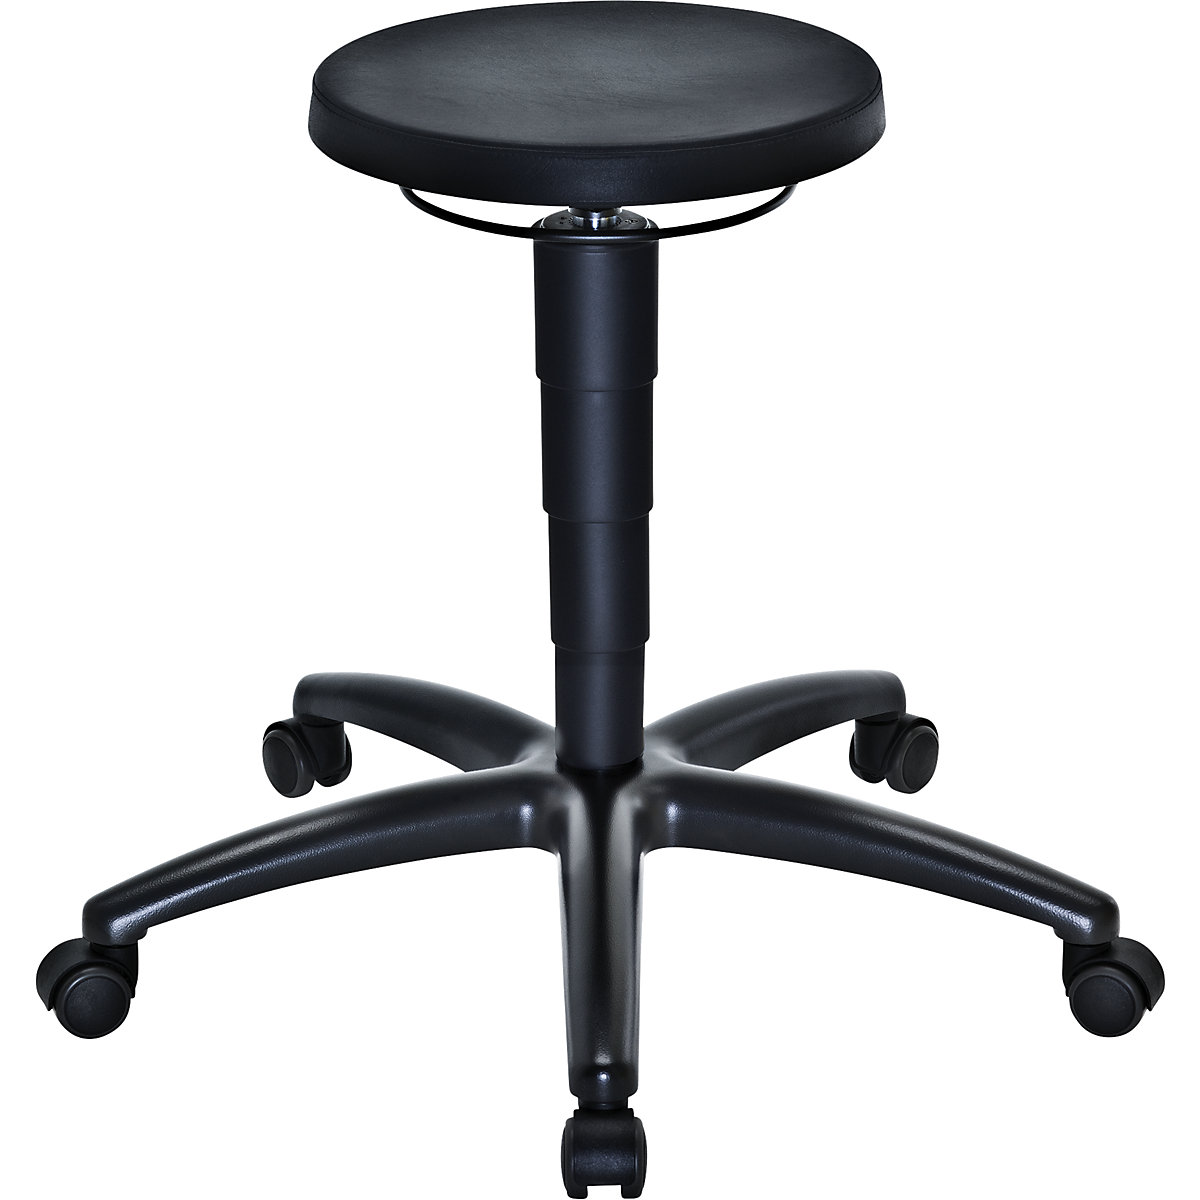 Industrial stool with gas lift height adjustment - eurokraft pro